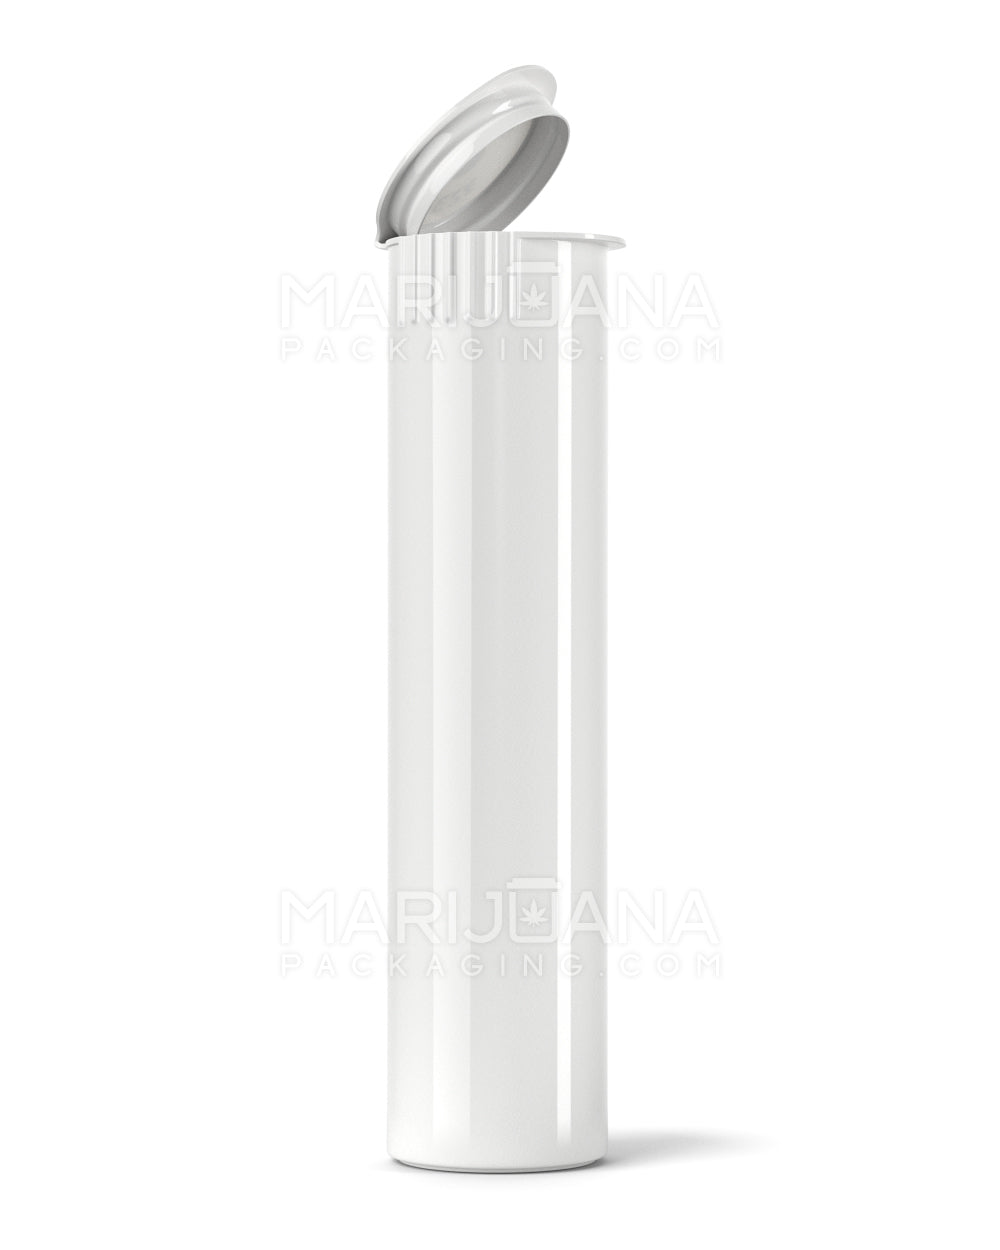 Child Resistant | Pop Top Opaque Plastic Pre-Roll Tubes | 78mm - White - 1200 Count - 1